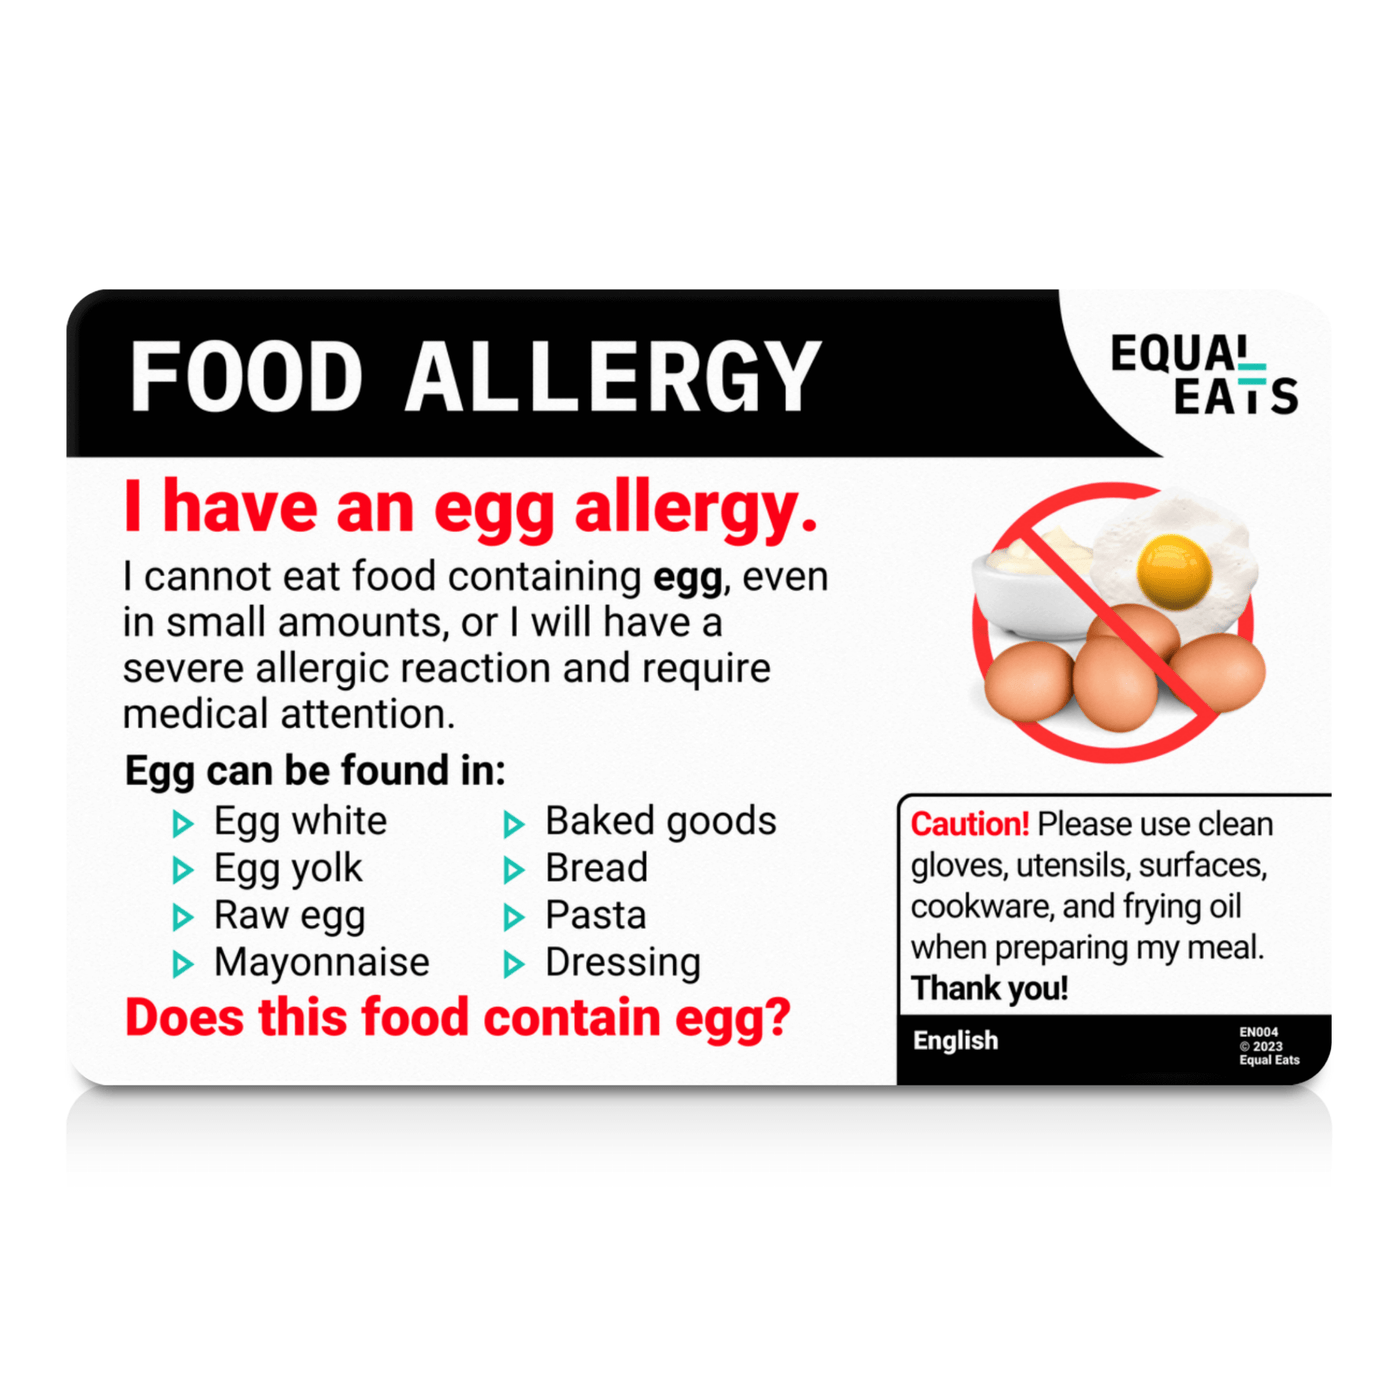 Egg Allergy Card by Equal Eats